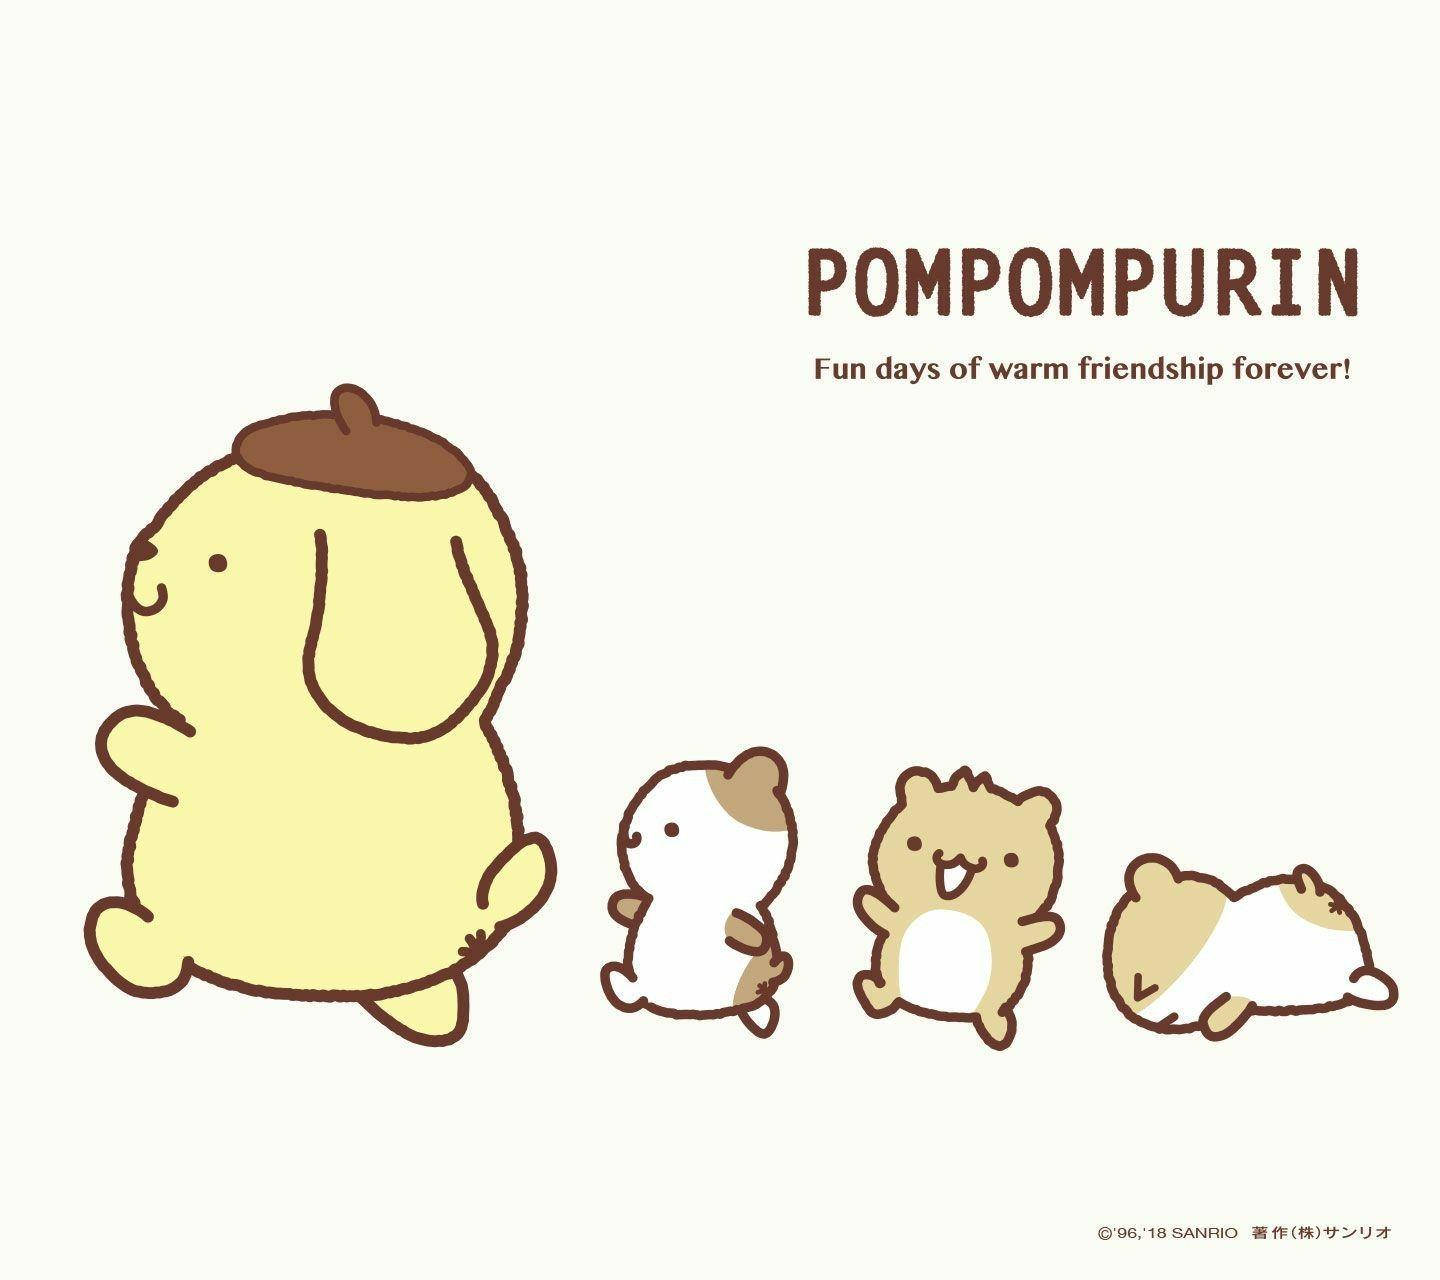 Enjoy a fun day out with Pompompurin and friends! Wallpaper